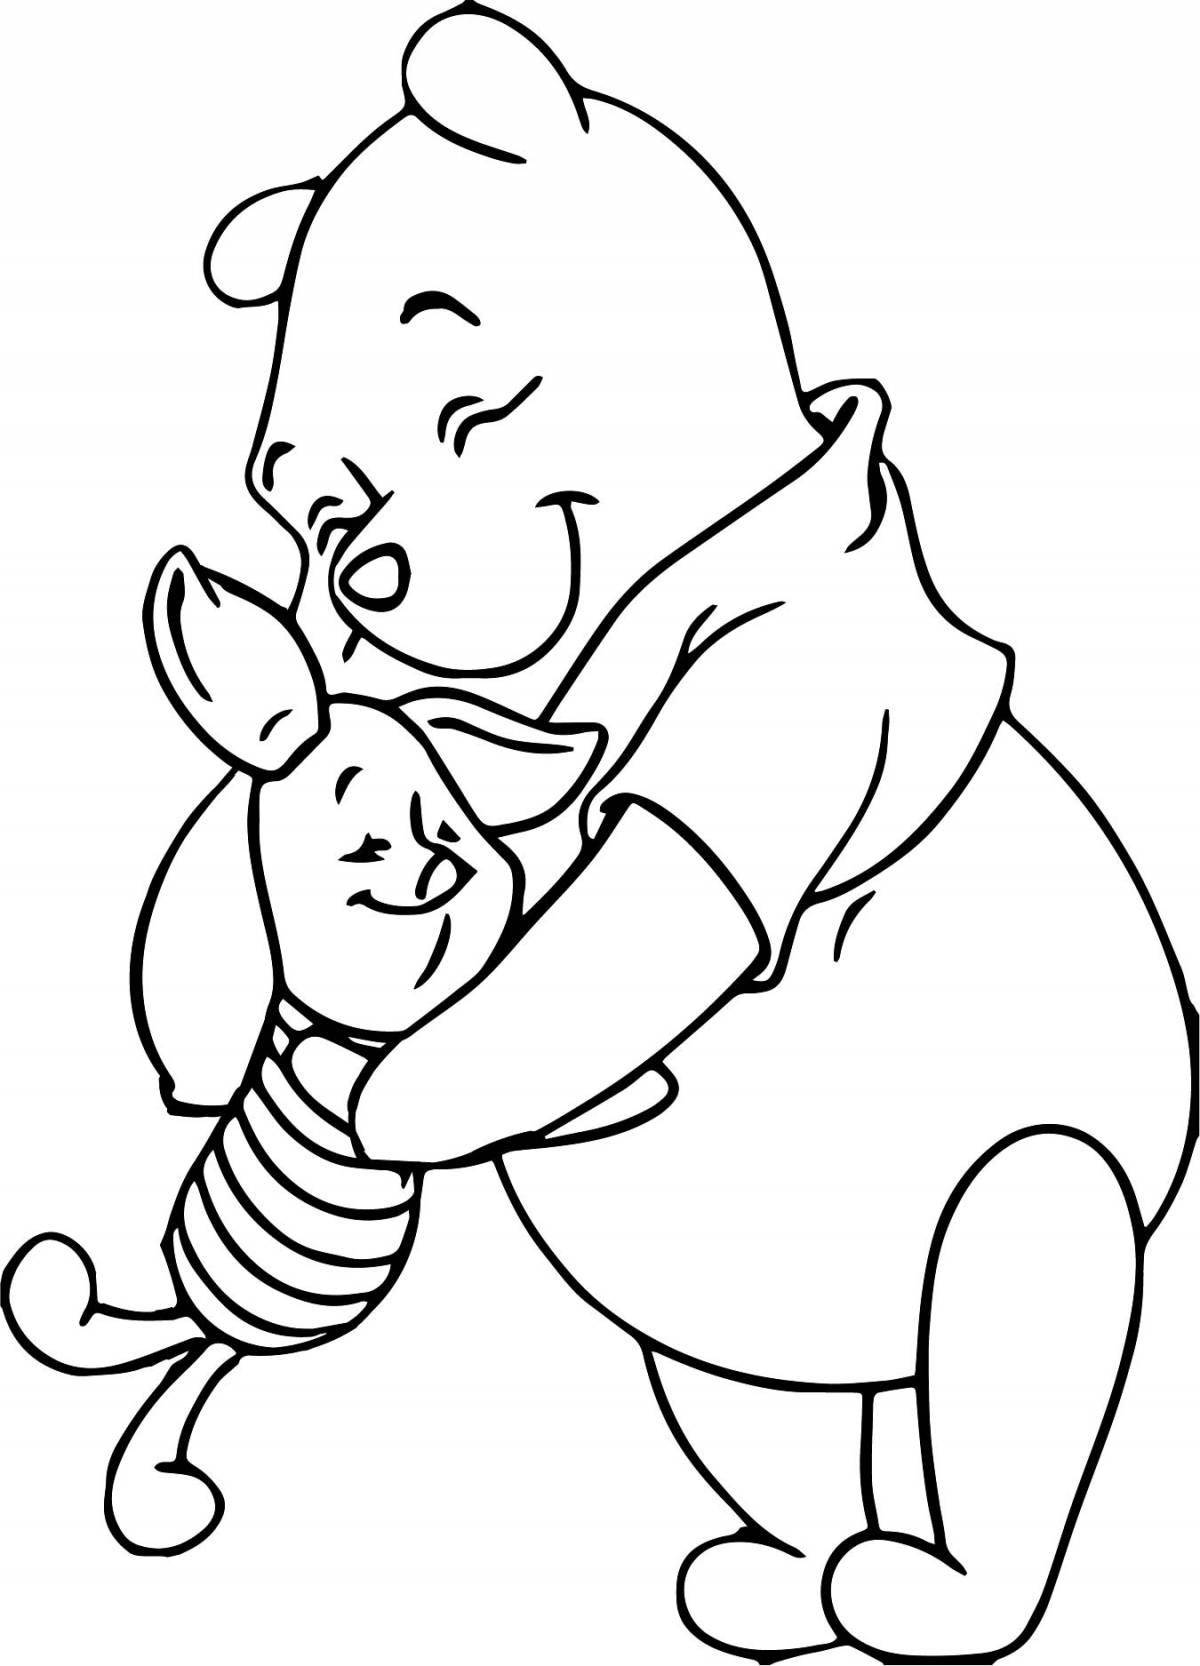 Hugs glowing coloring pages